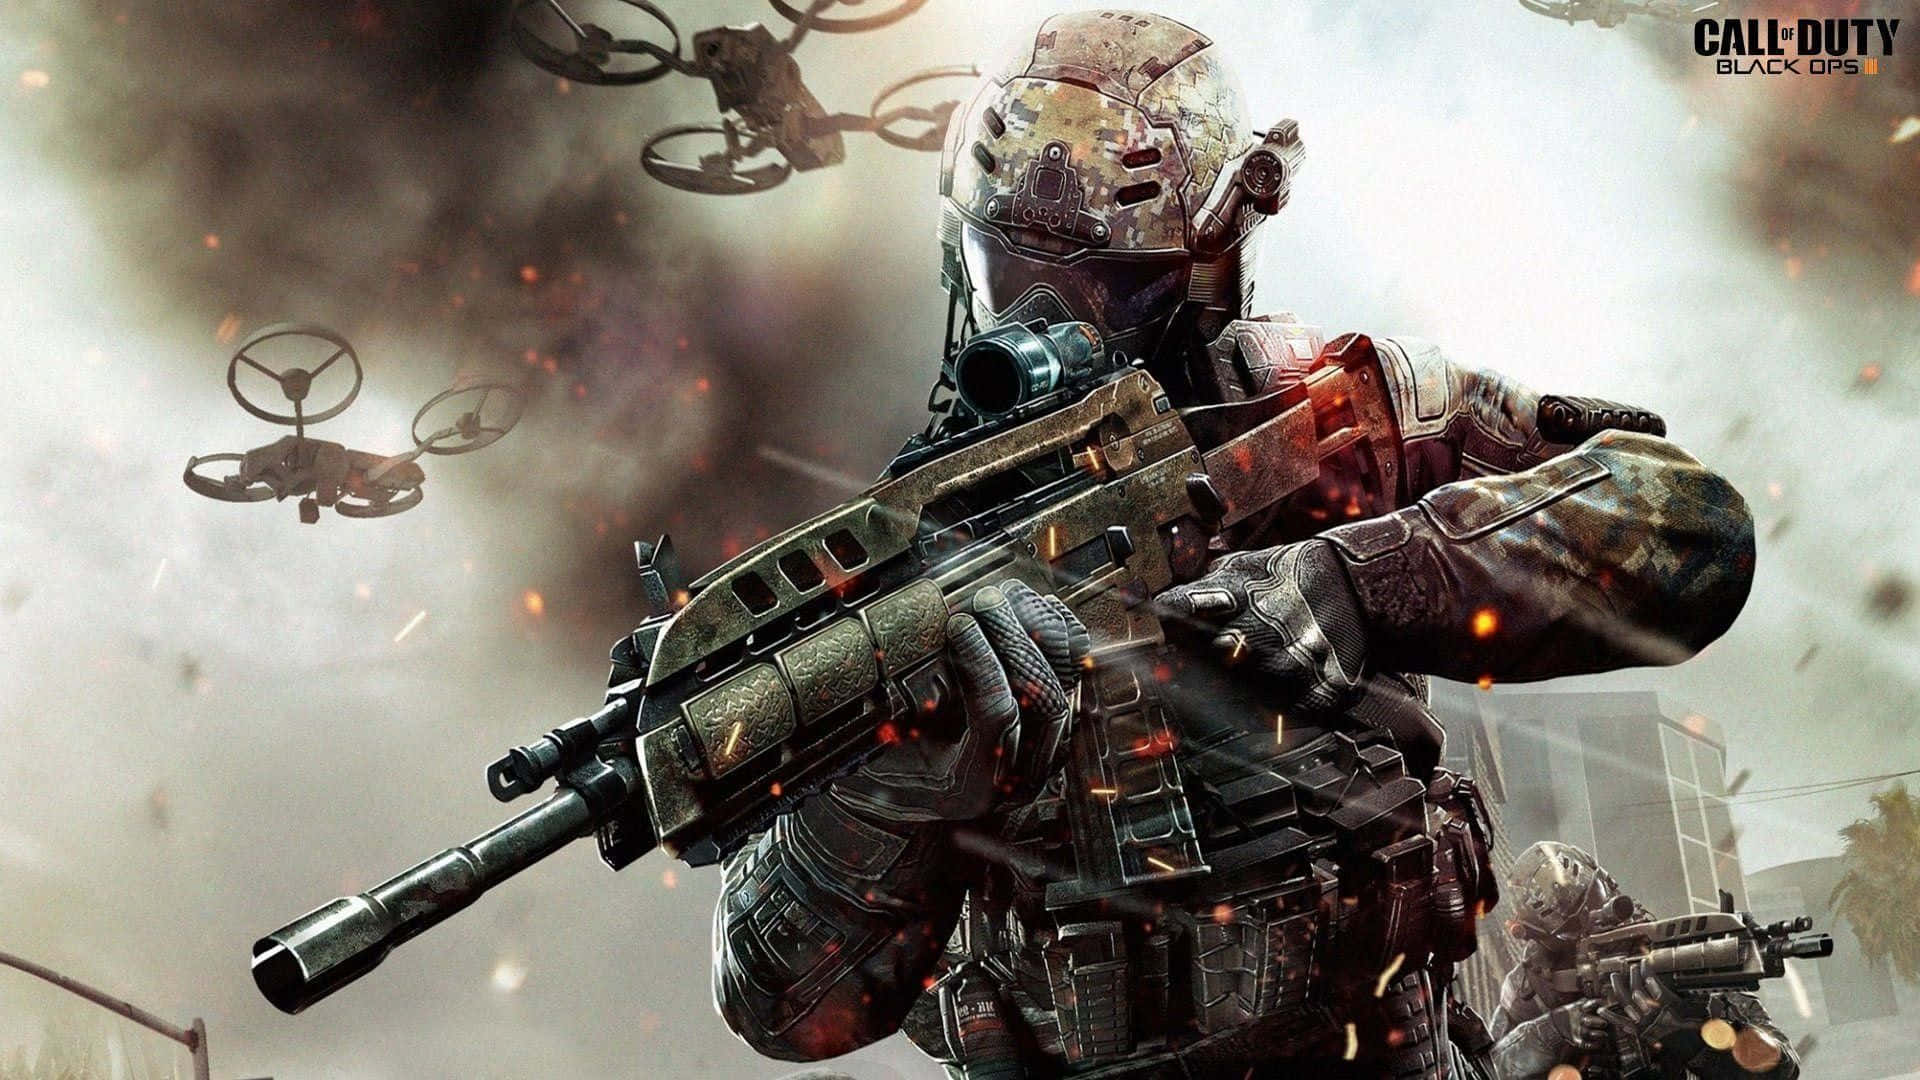 Soldiers wage a war of tech-savvy weapons and skill in Call of Duty: Black Ops 3 Wallpaper